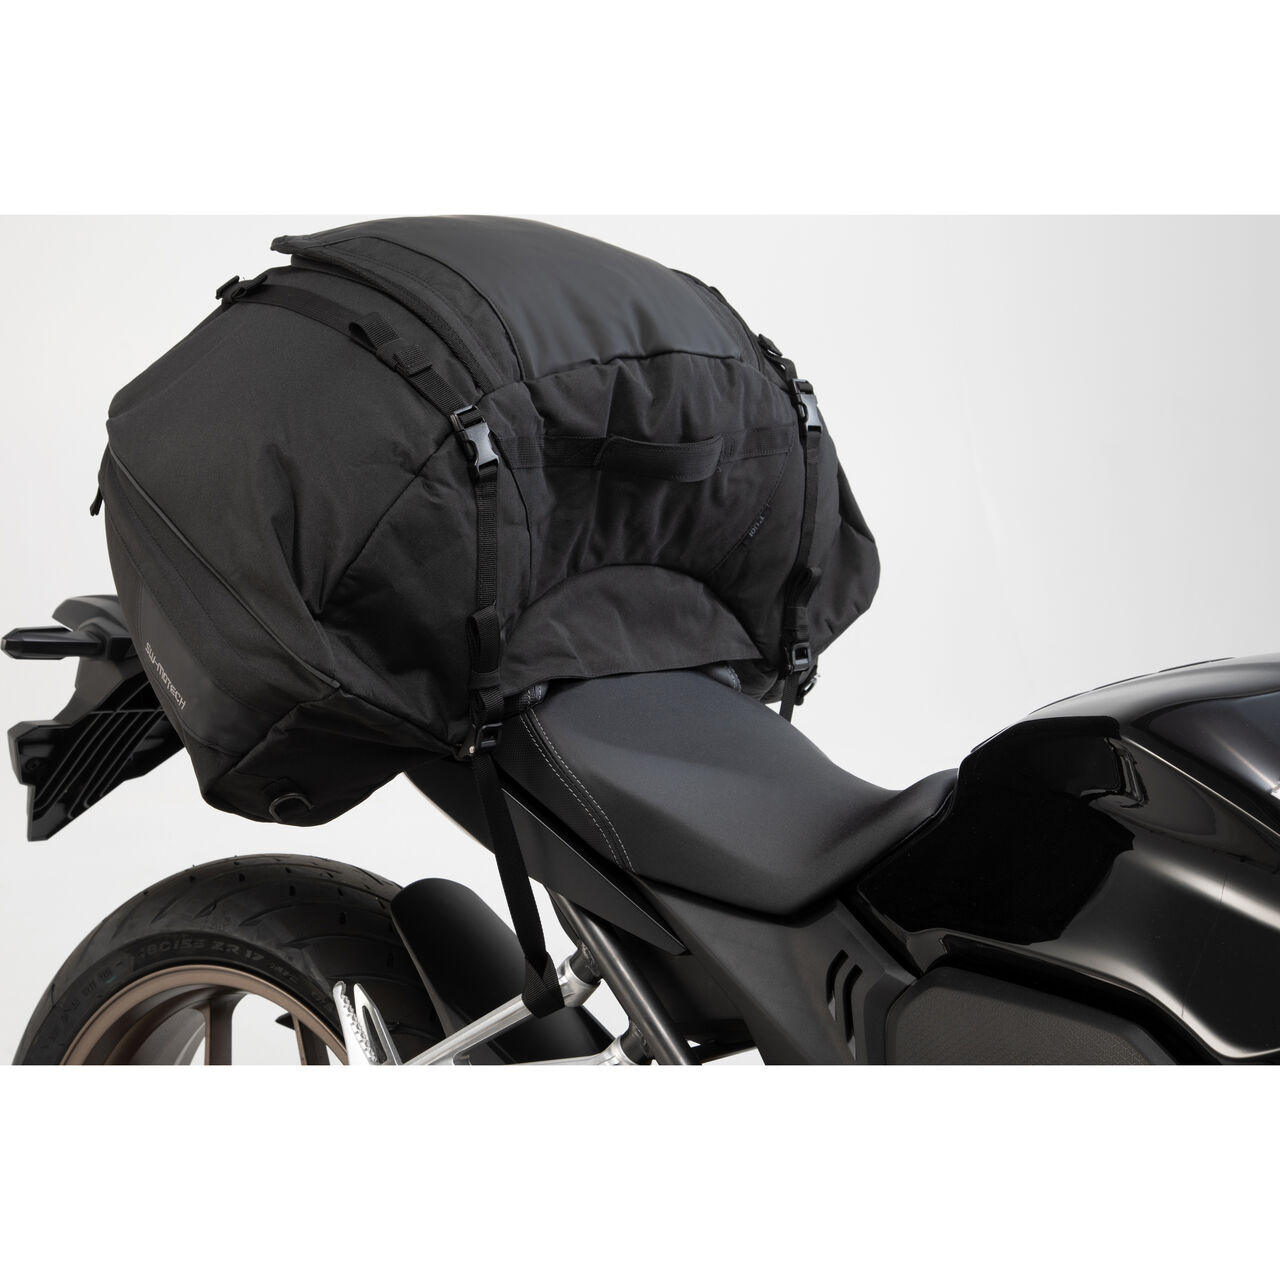 rearbag ION L  50 liters